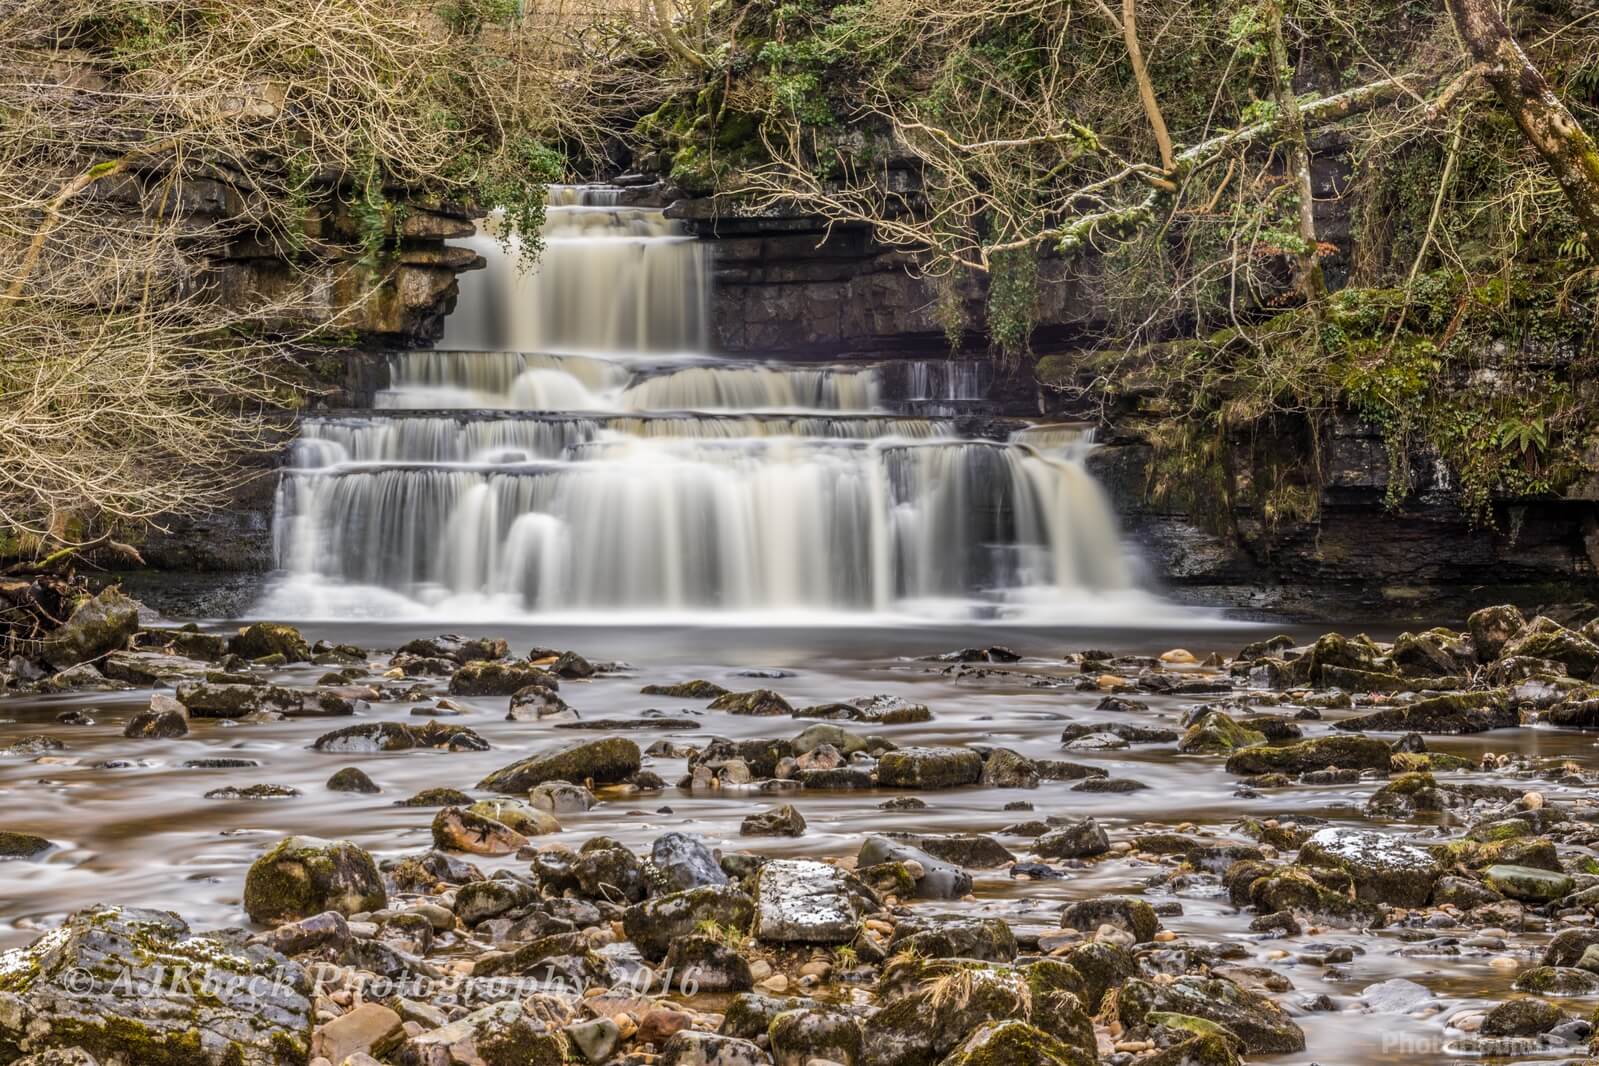 Image of Cotter Force by Andy Killingbeck